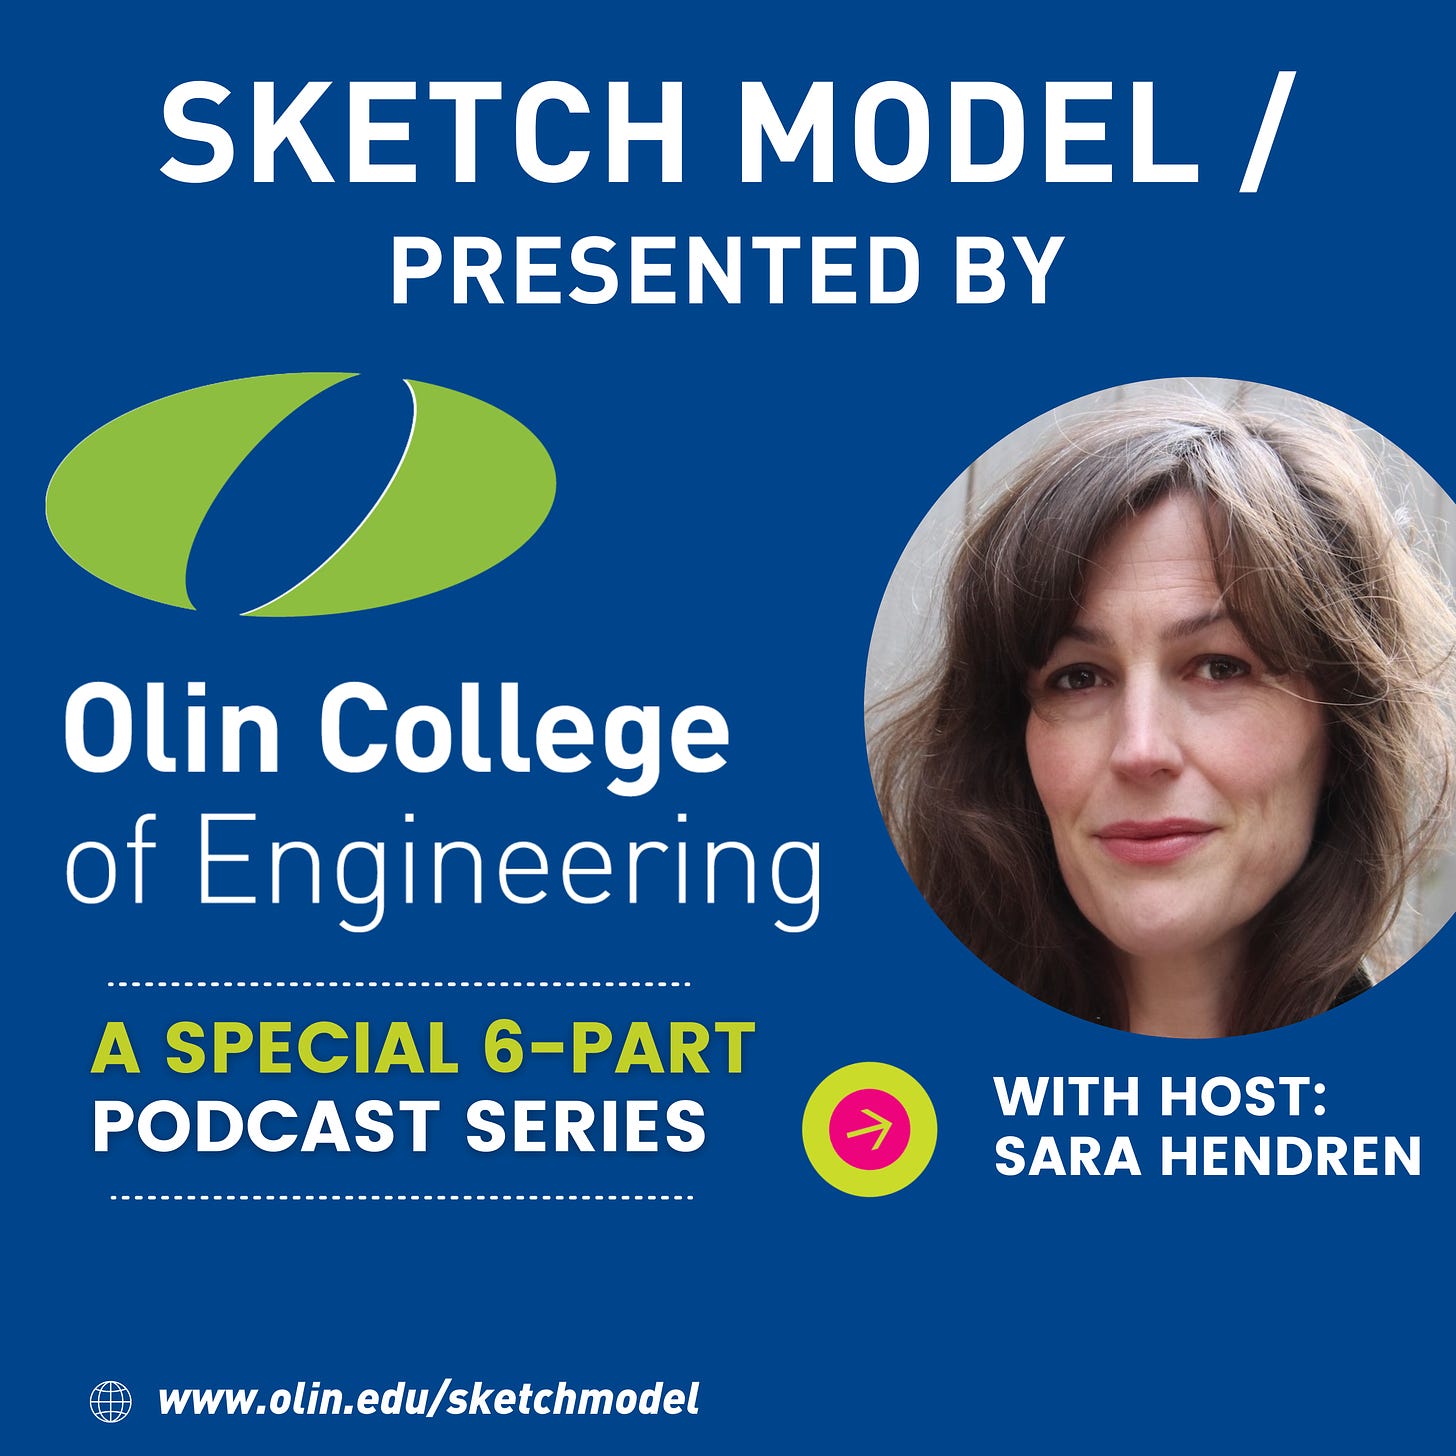 Thumbnail for the Sketch Model podcast, presented by Olin College of Engineering, with a photo of Sara and the words: "with host Sara Hendren" and the URL to our site: www.olin.edu/sketchmodel